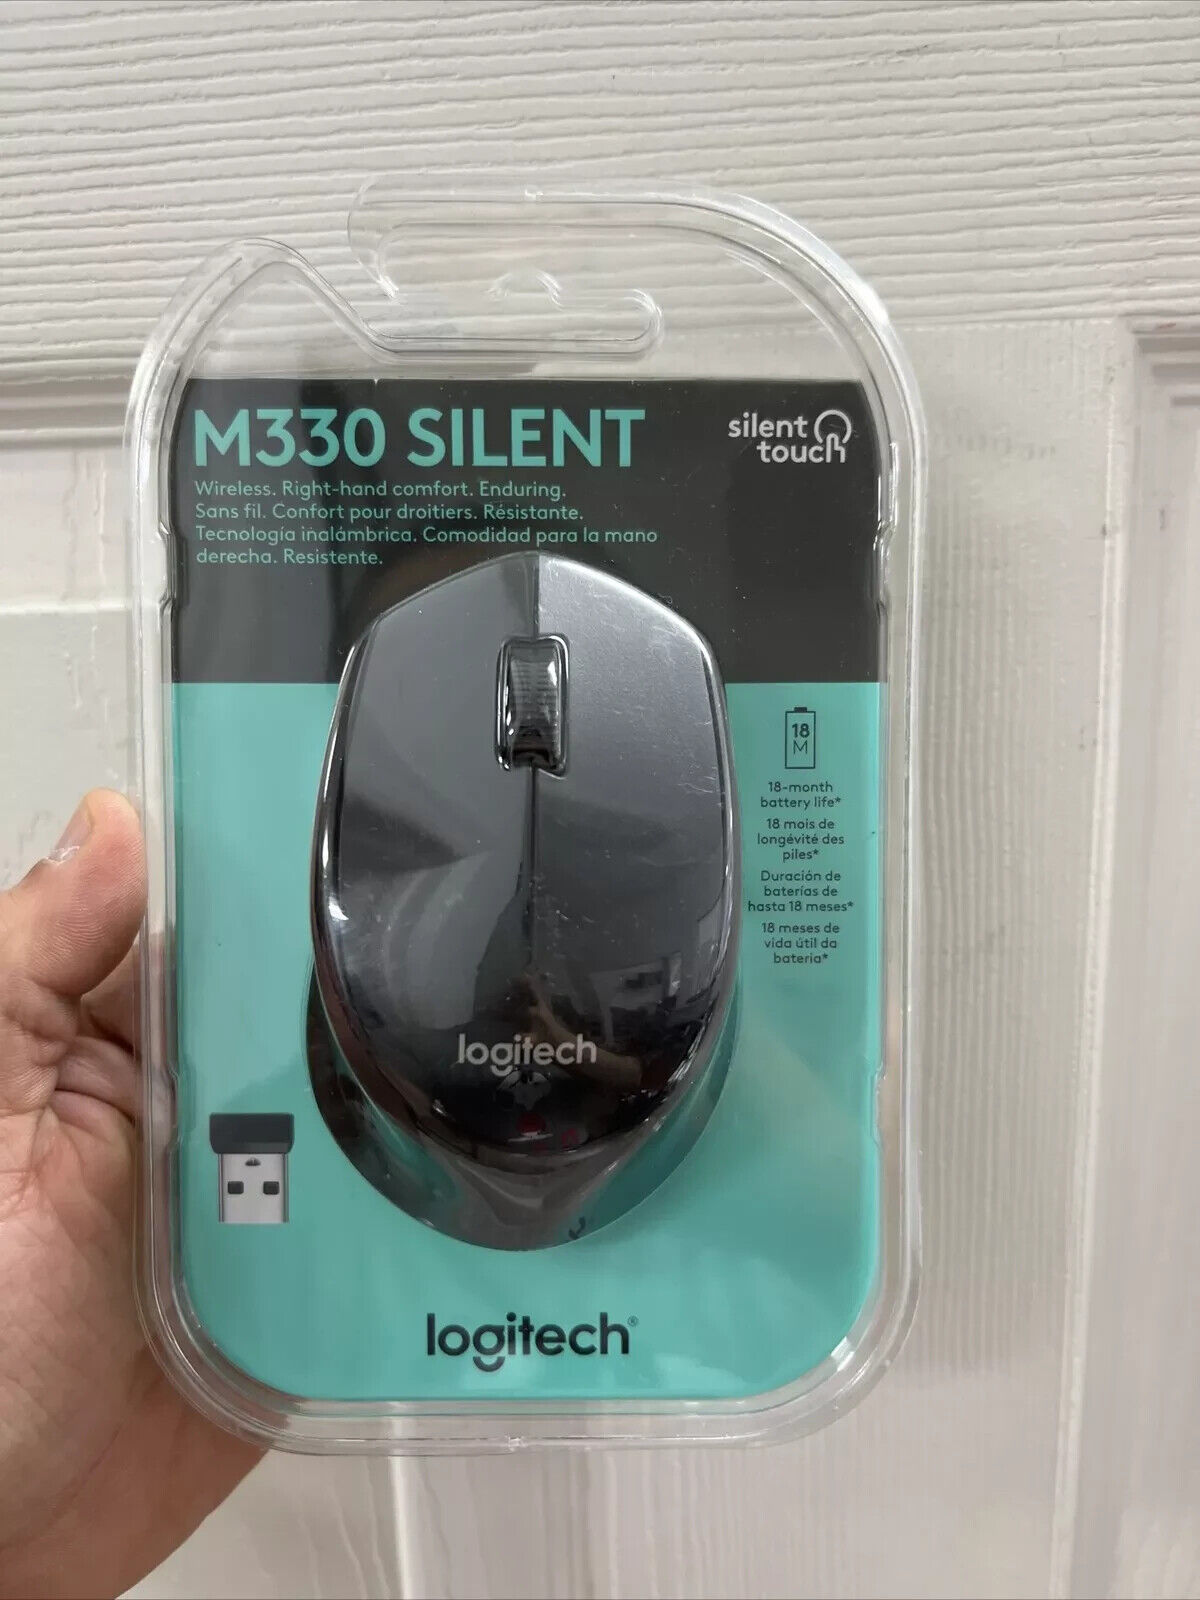 NEW - Logitech M330 SILENT Wireless Optical Mouse with Quiet Clicks - Black